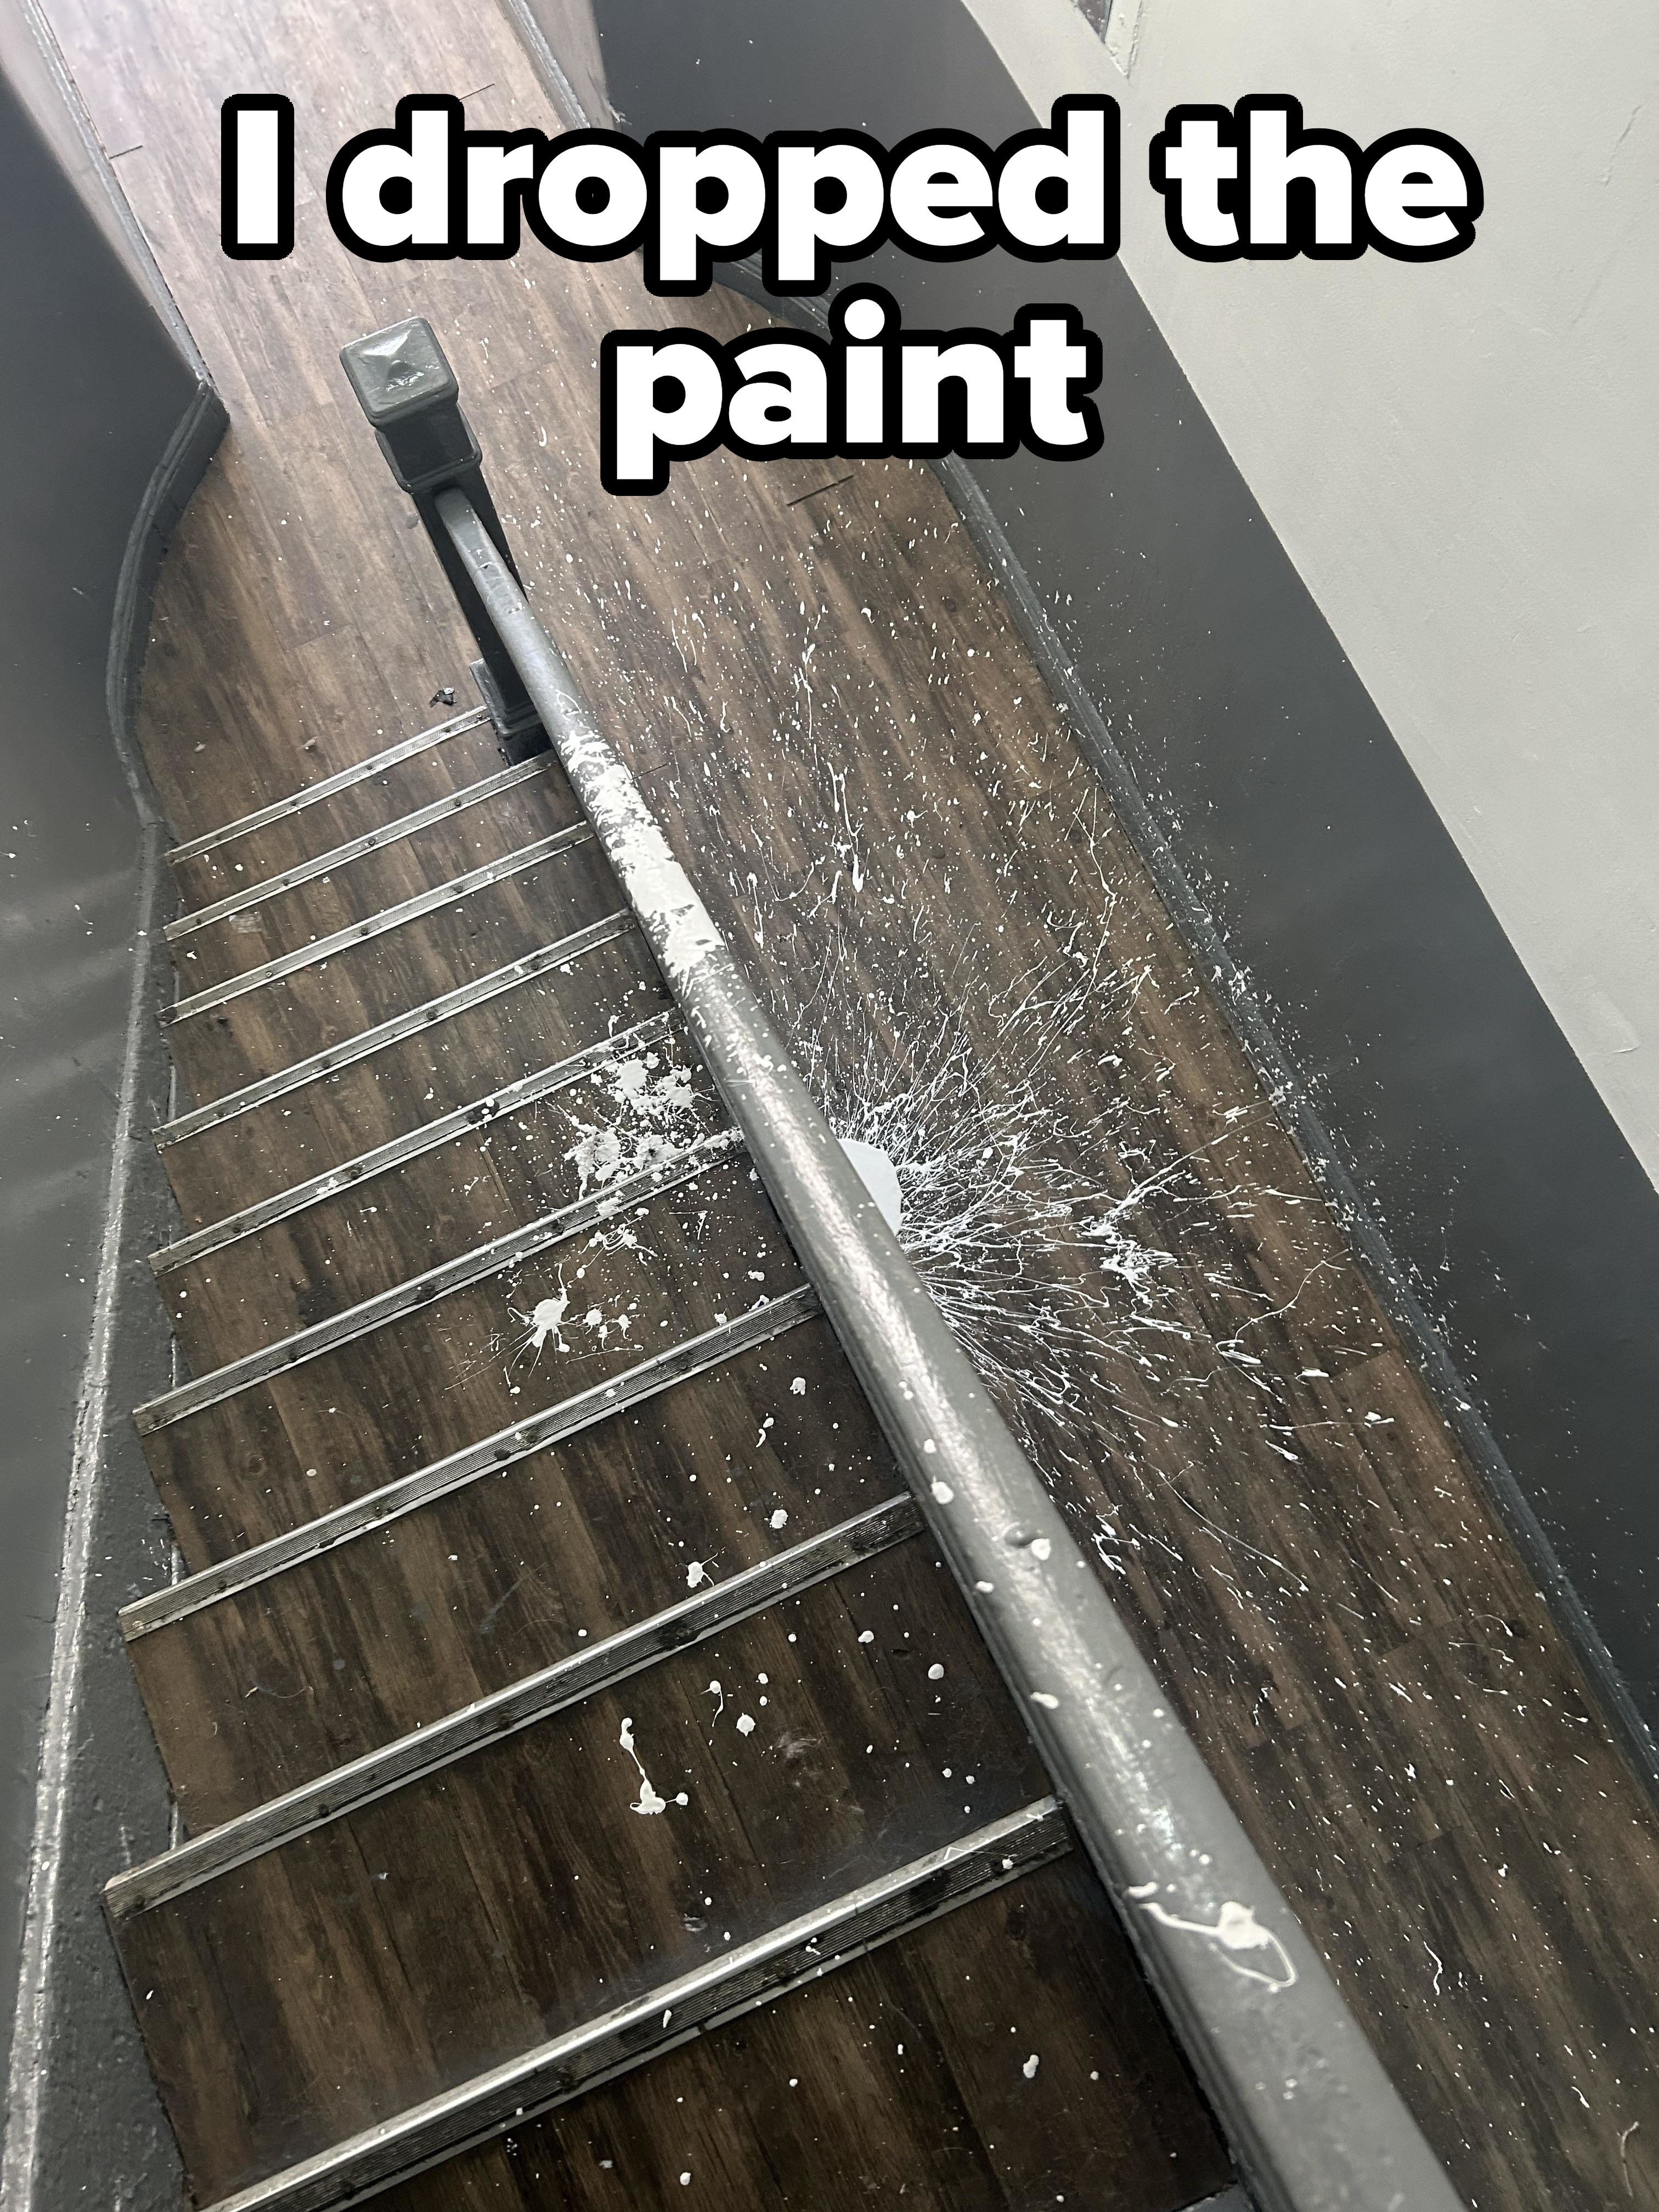 Paint splattered on a wooden staircase next to a metal railing